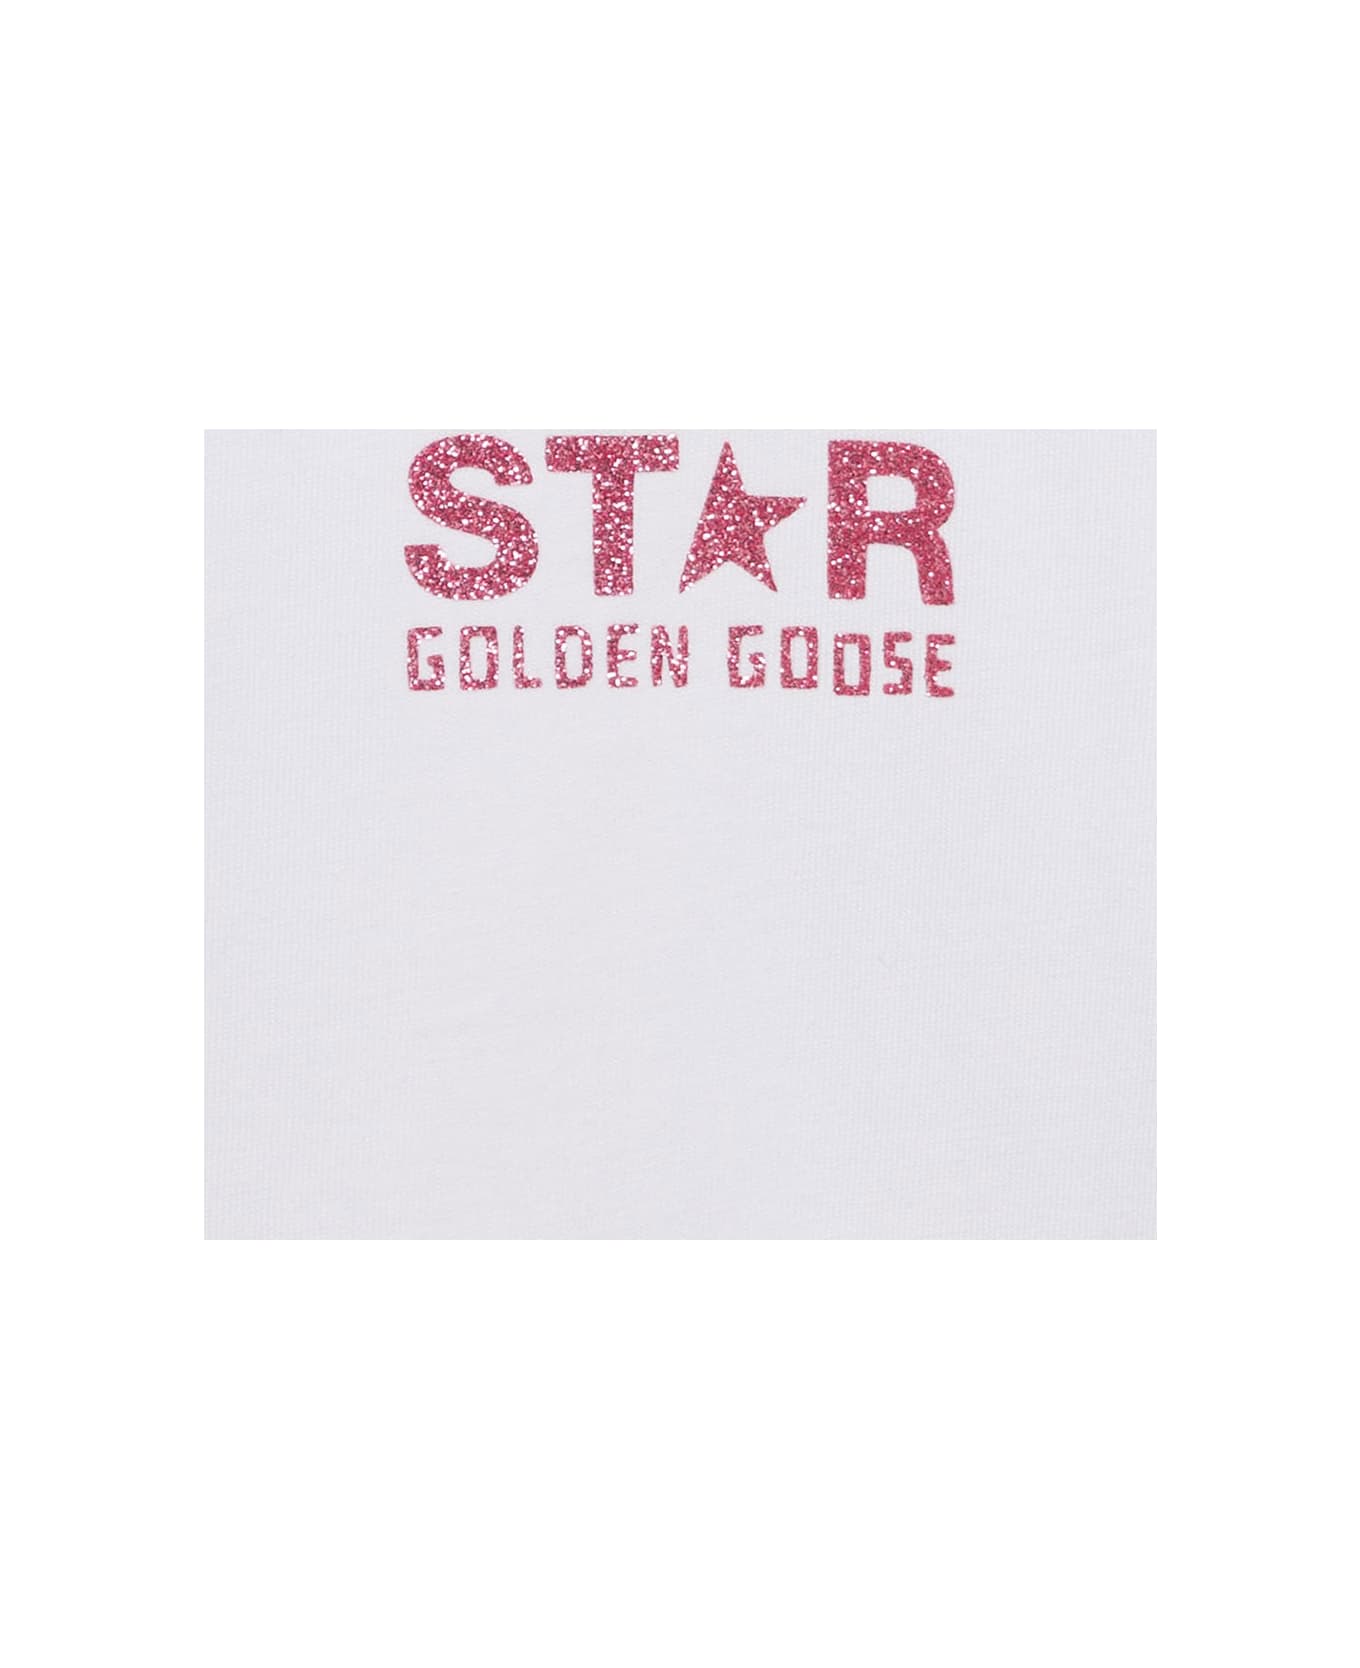 Golden Goose White Crewneck T-shirt With Contrasting Logo Lettering Print In Cotton Boy - White/pink